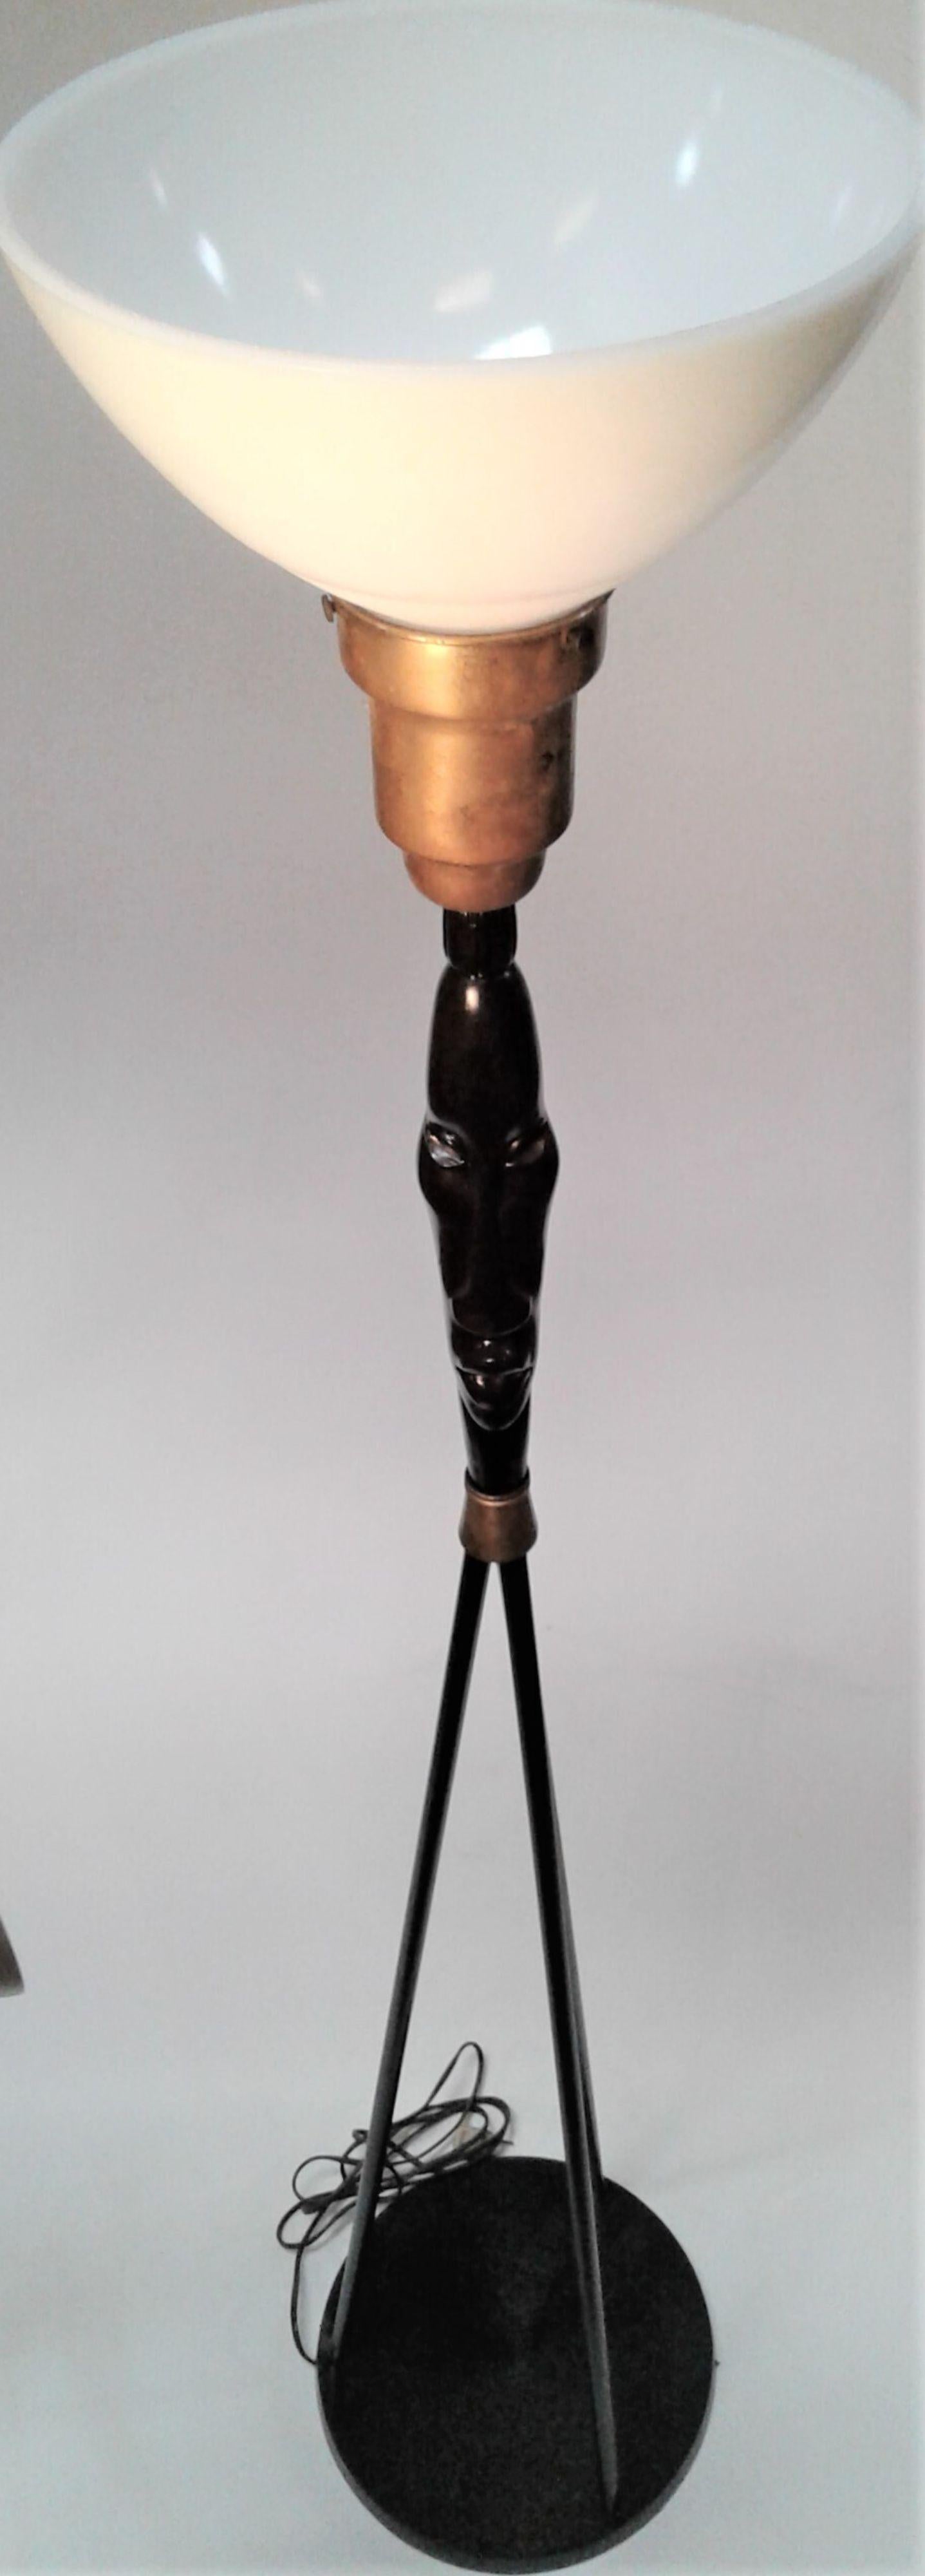 Mid-Century Frederic Weinberg Floor Lamp Mask Man Ray Tiki In Excellent Condition For Sale In Van Nuys, CA